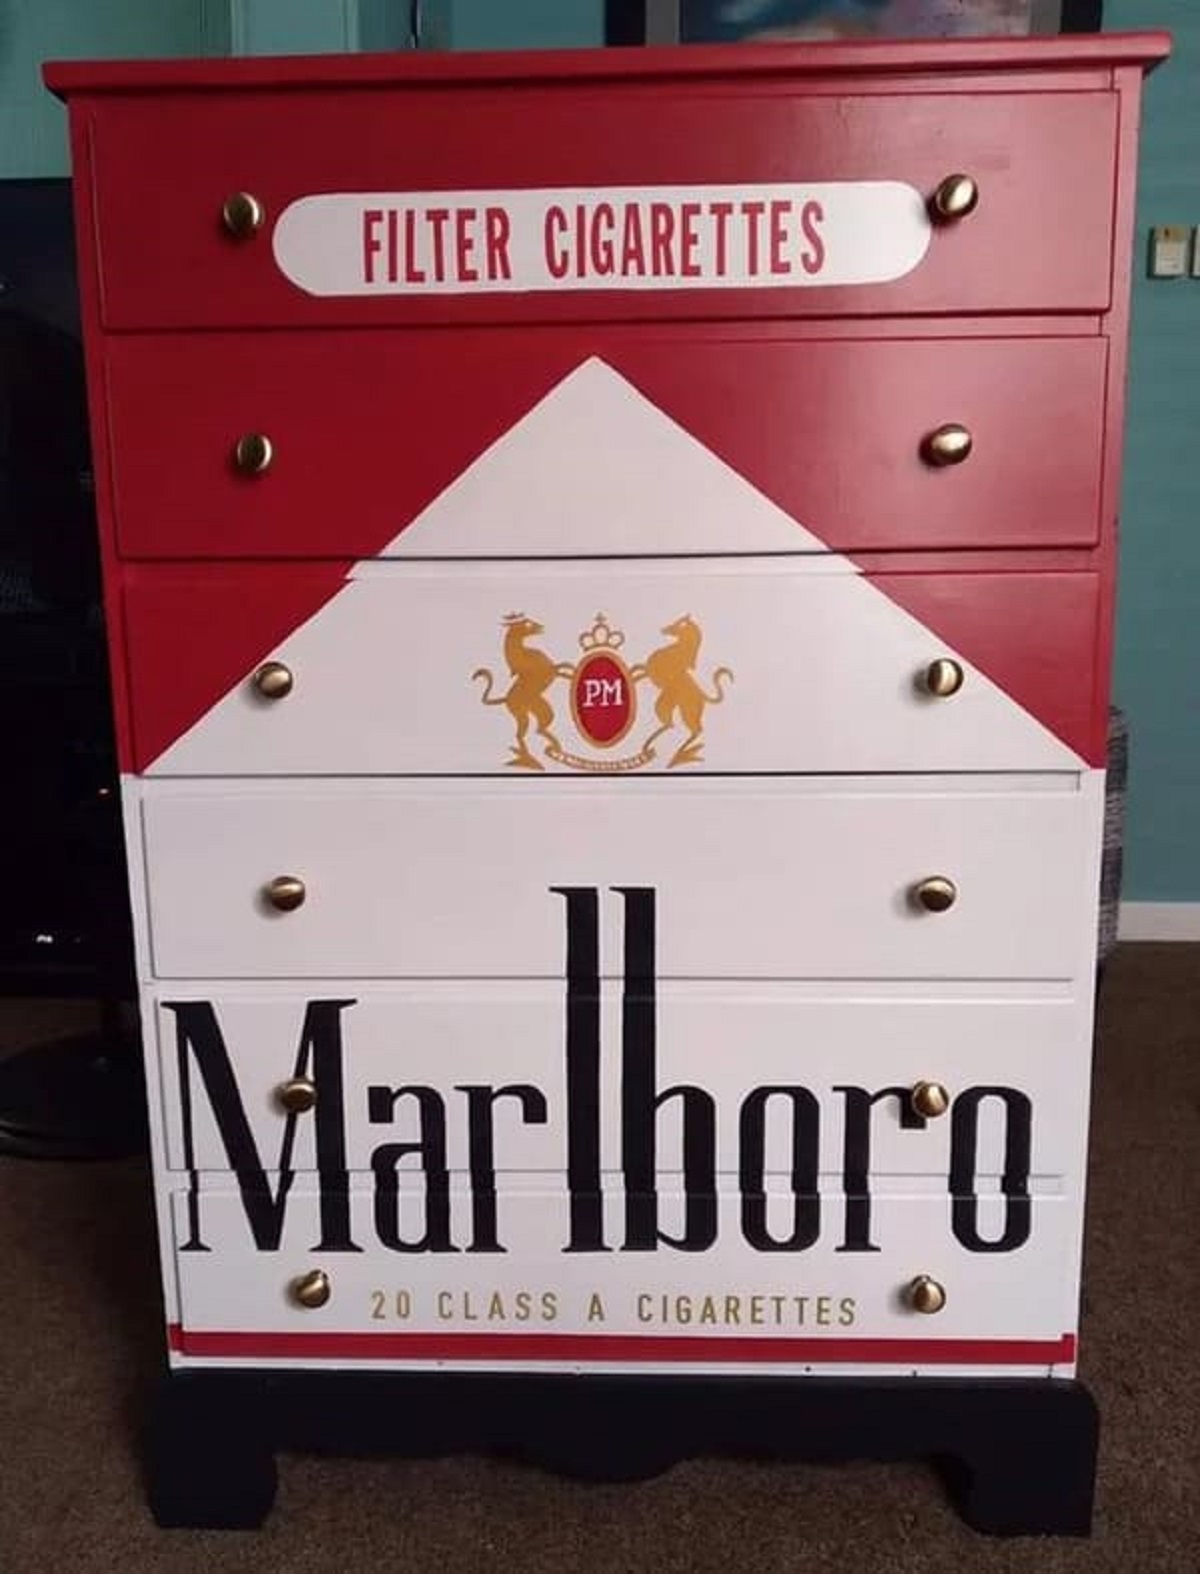 “I’m in a craft group on fb and a lady posted her Newport dresser she painted. Comments told her to make a Marlboro one next”